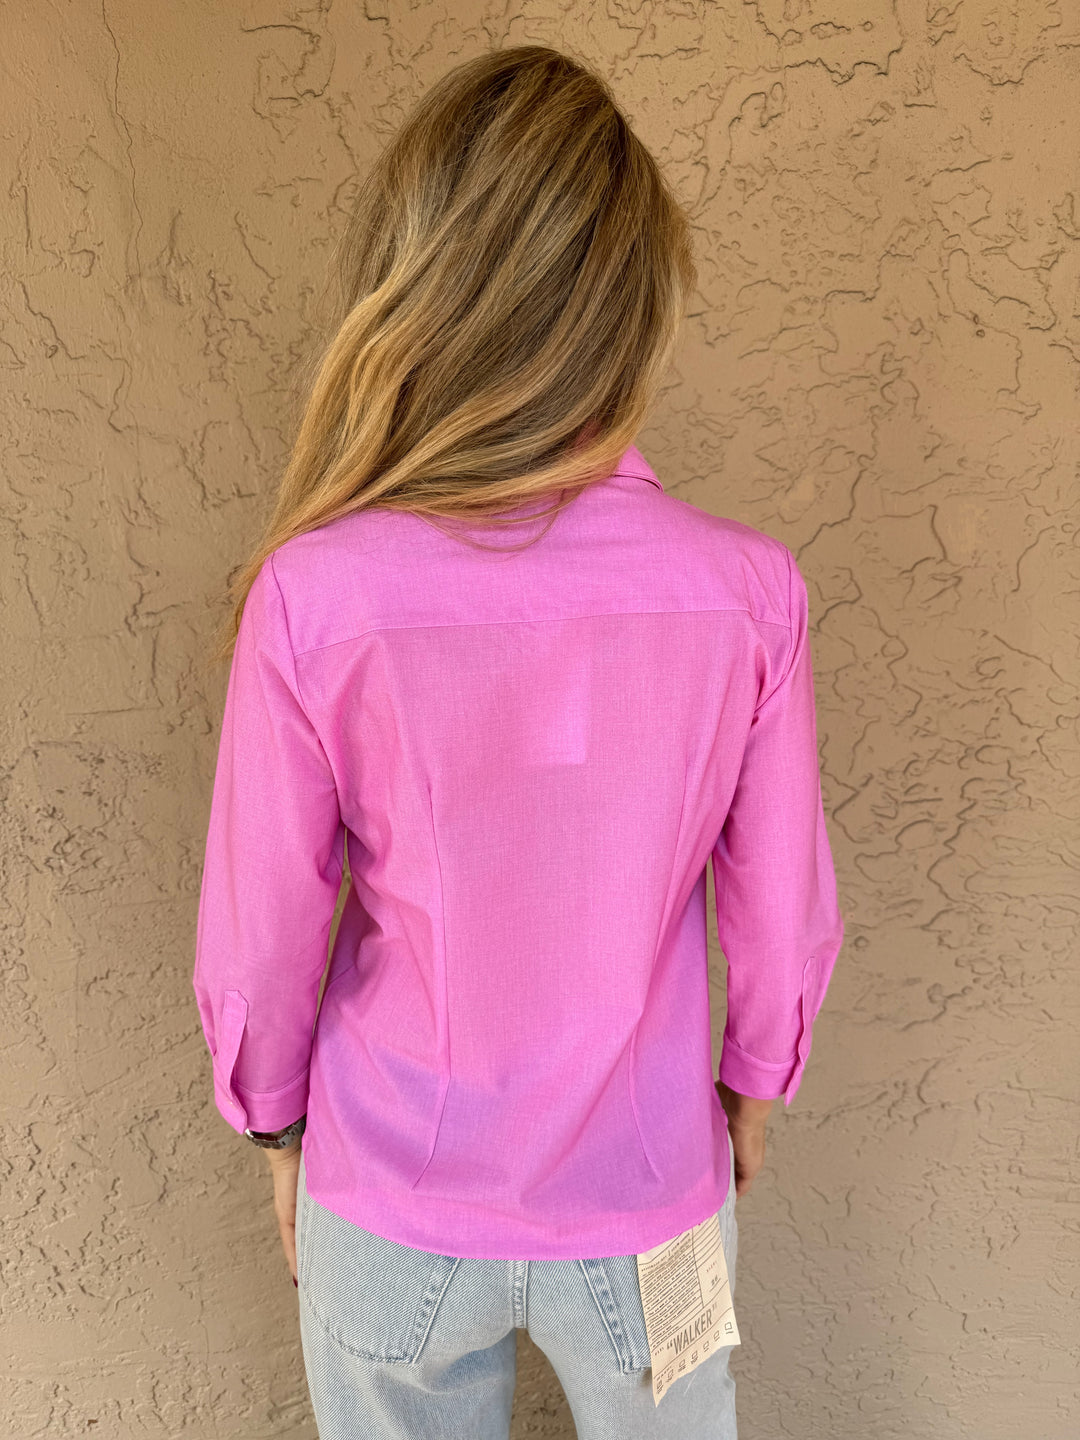 Ameliora Diane 3/4 Sleeve Shirt in Rose - Back View